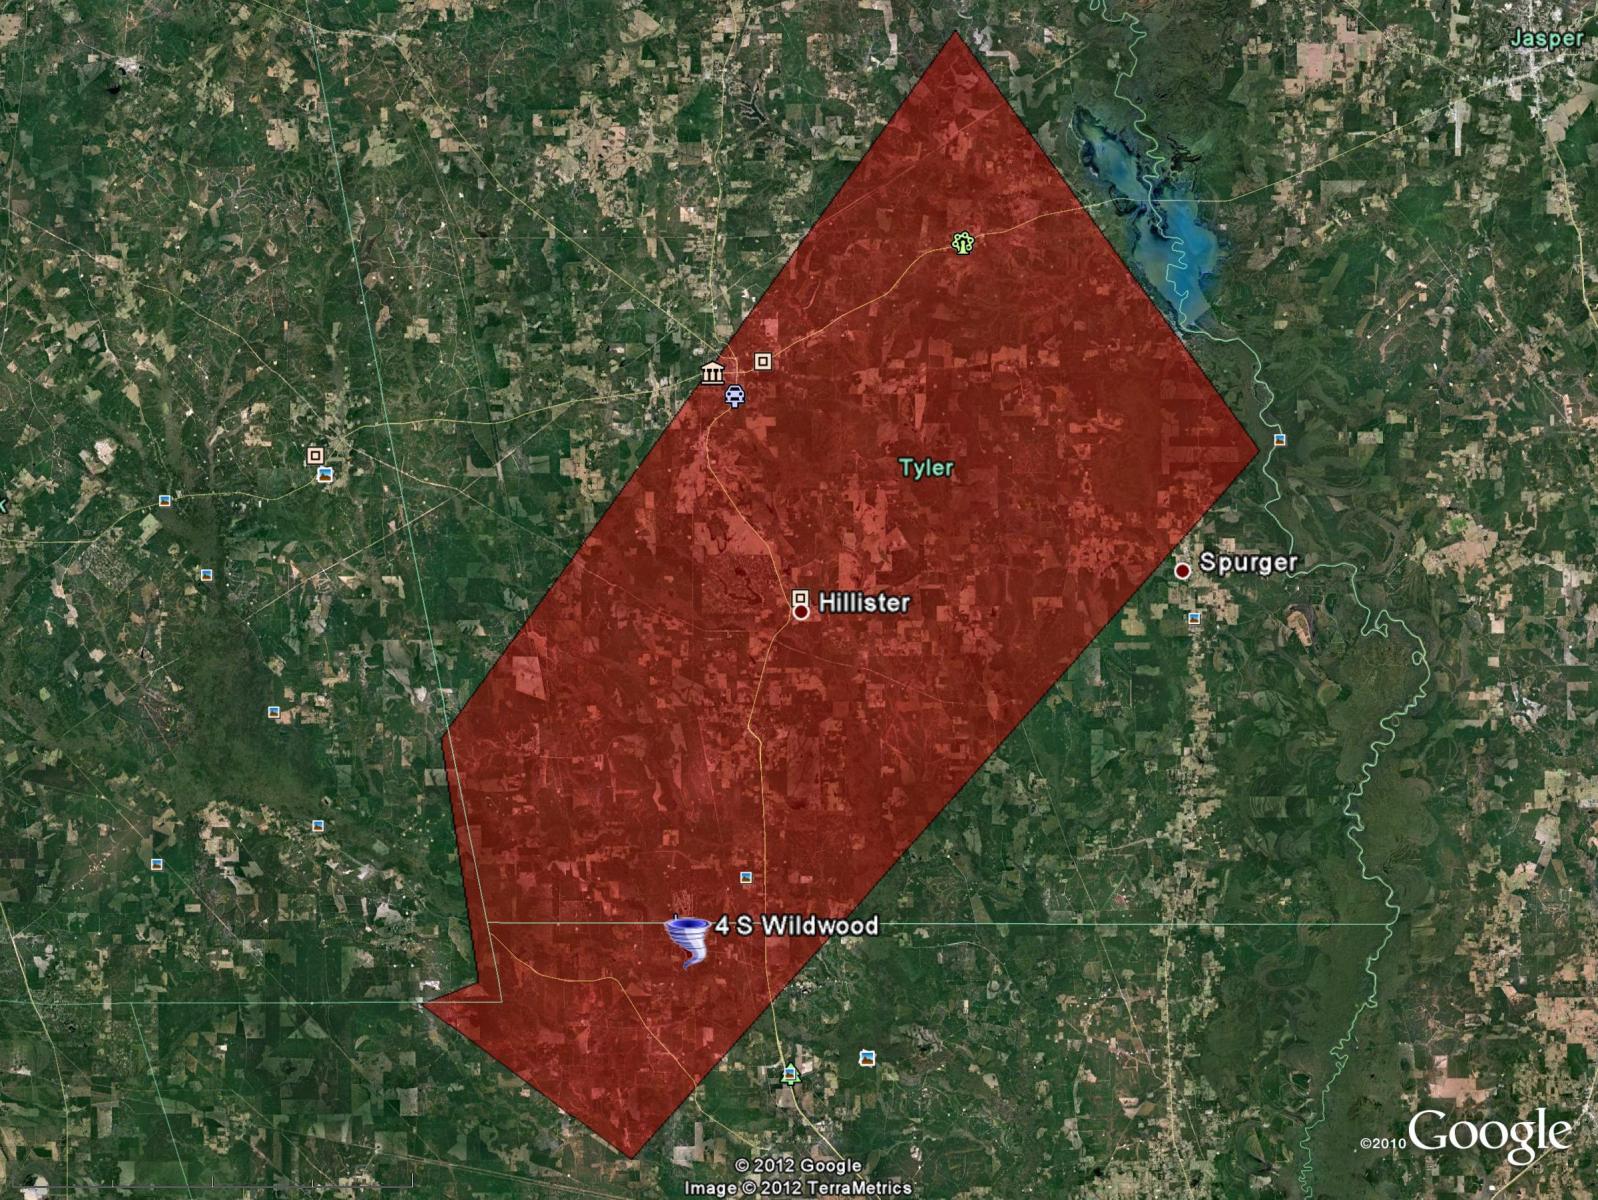 January 25 Outbreak image - click for larger version